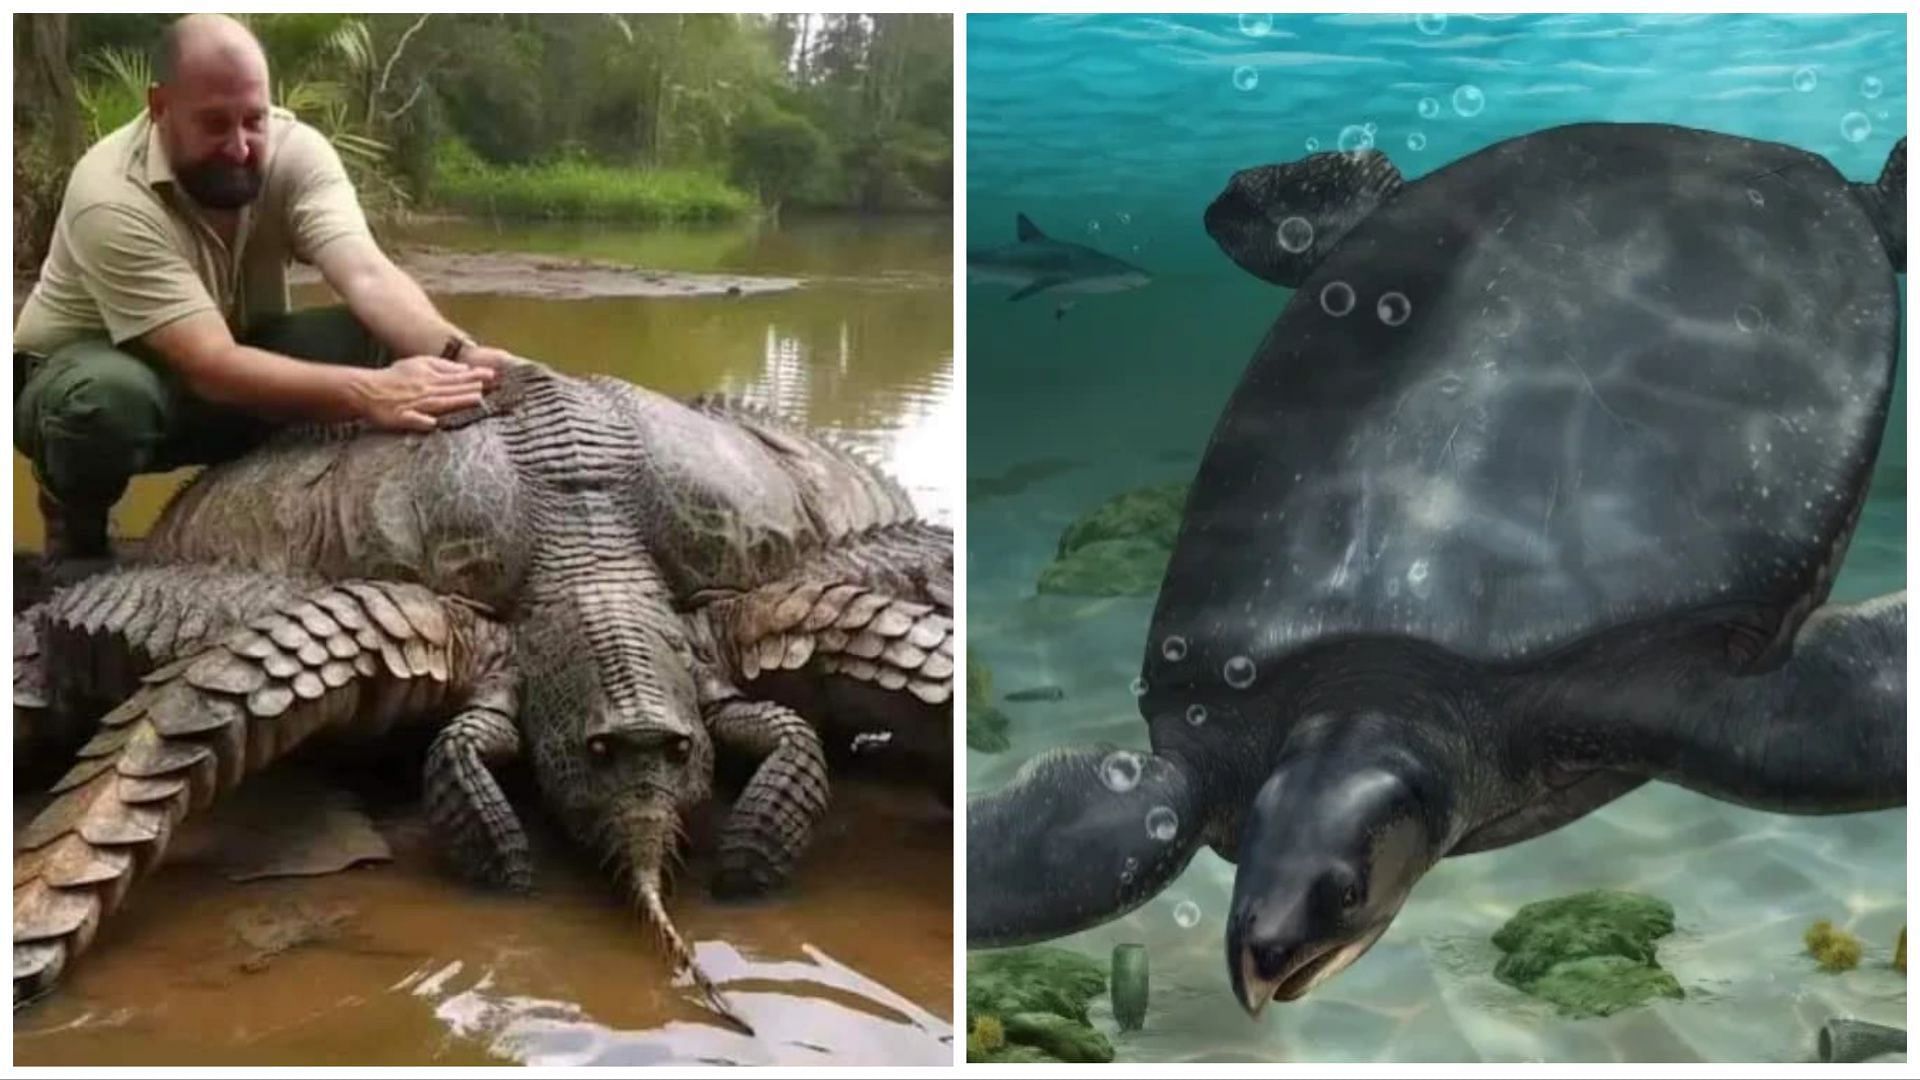 This prehistoric turtle octopus hybrid is making rounds on social media (Image via Facebook / The Somerset Insider/ Smithsonian Magazine)